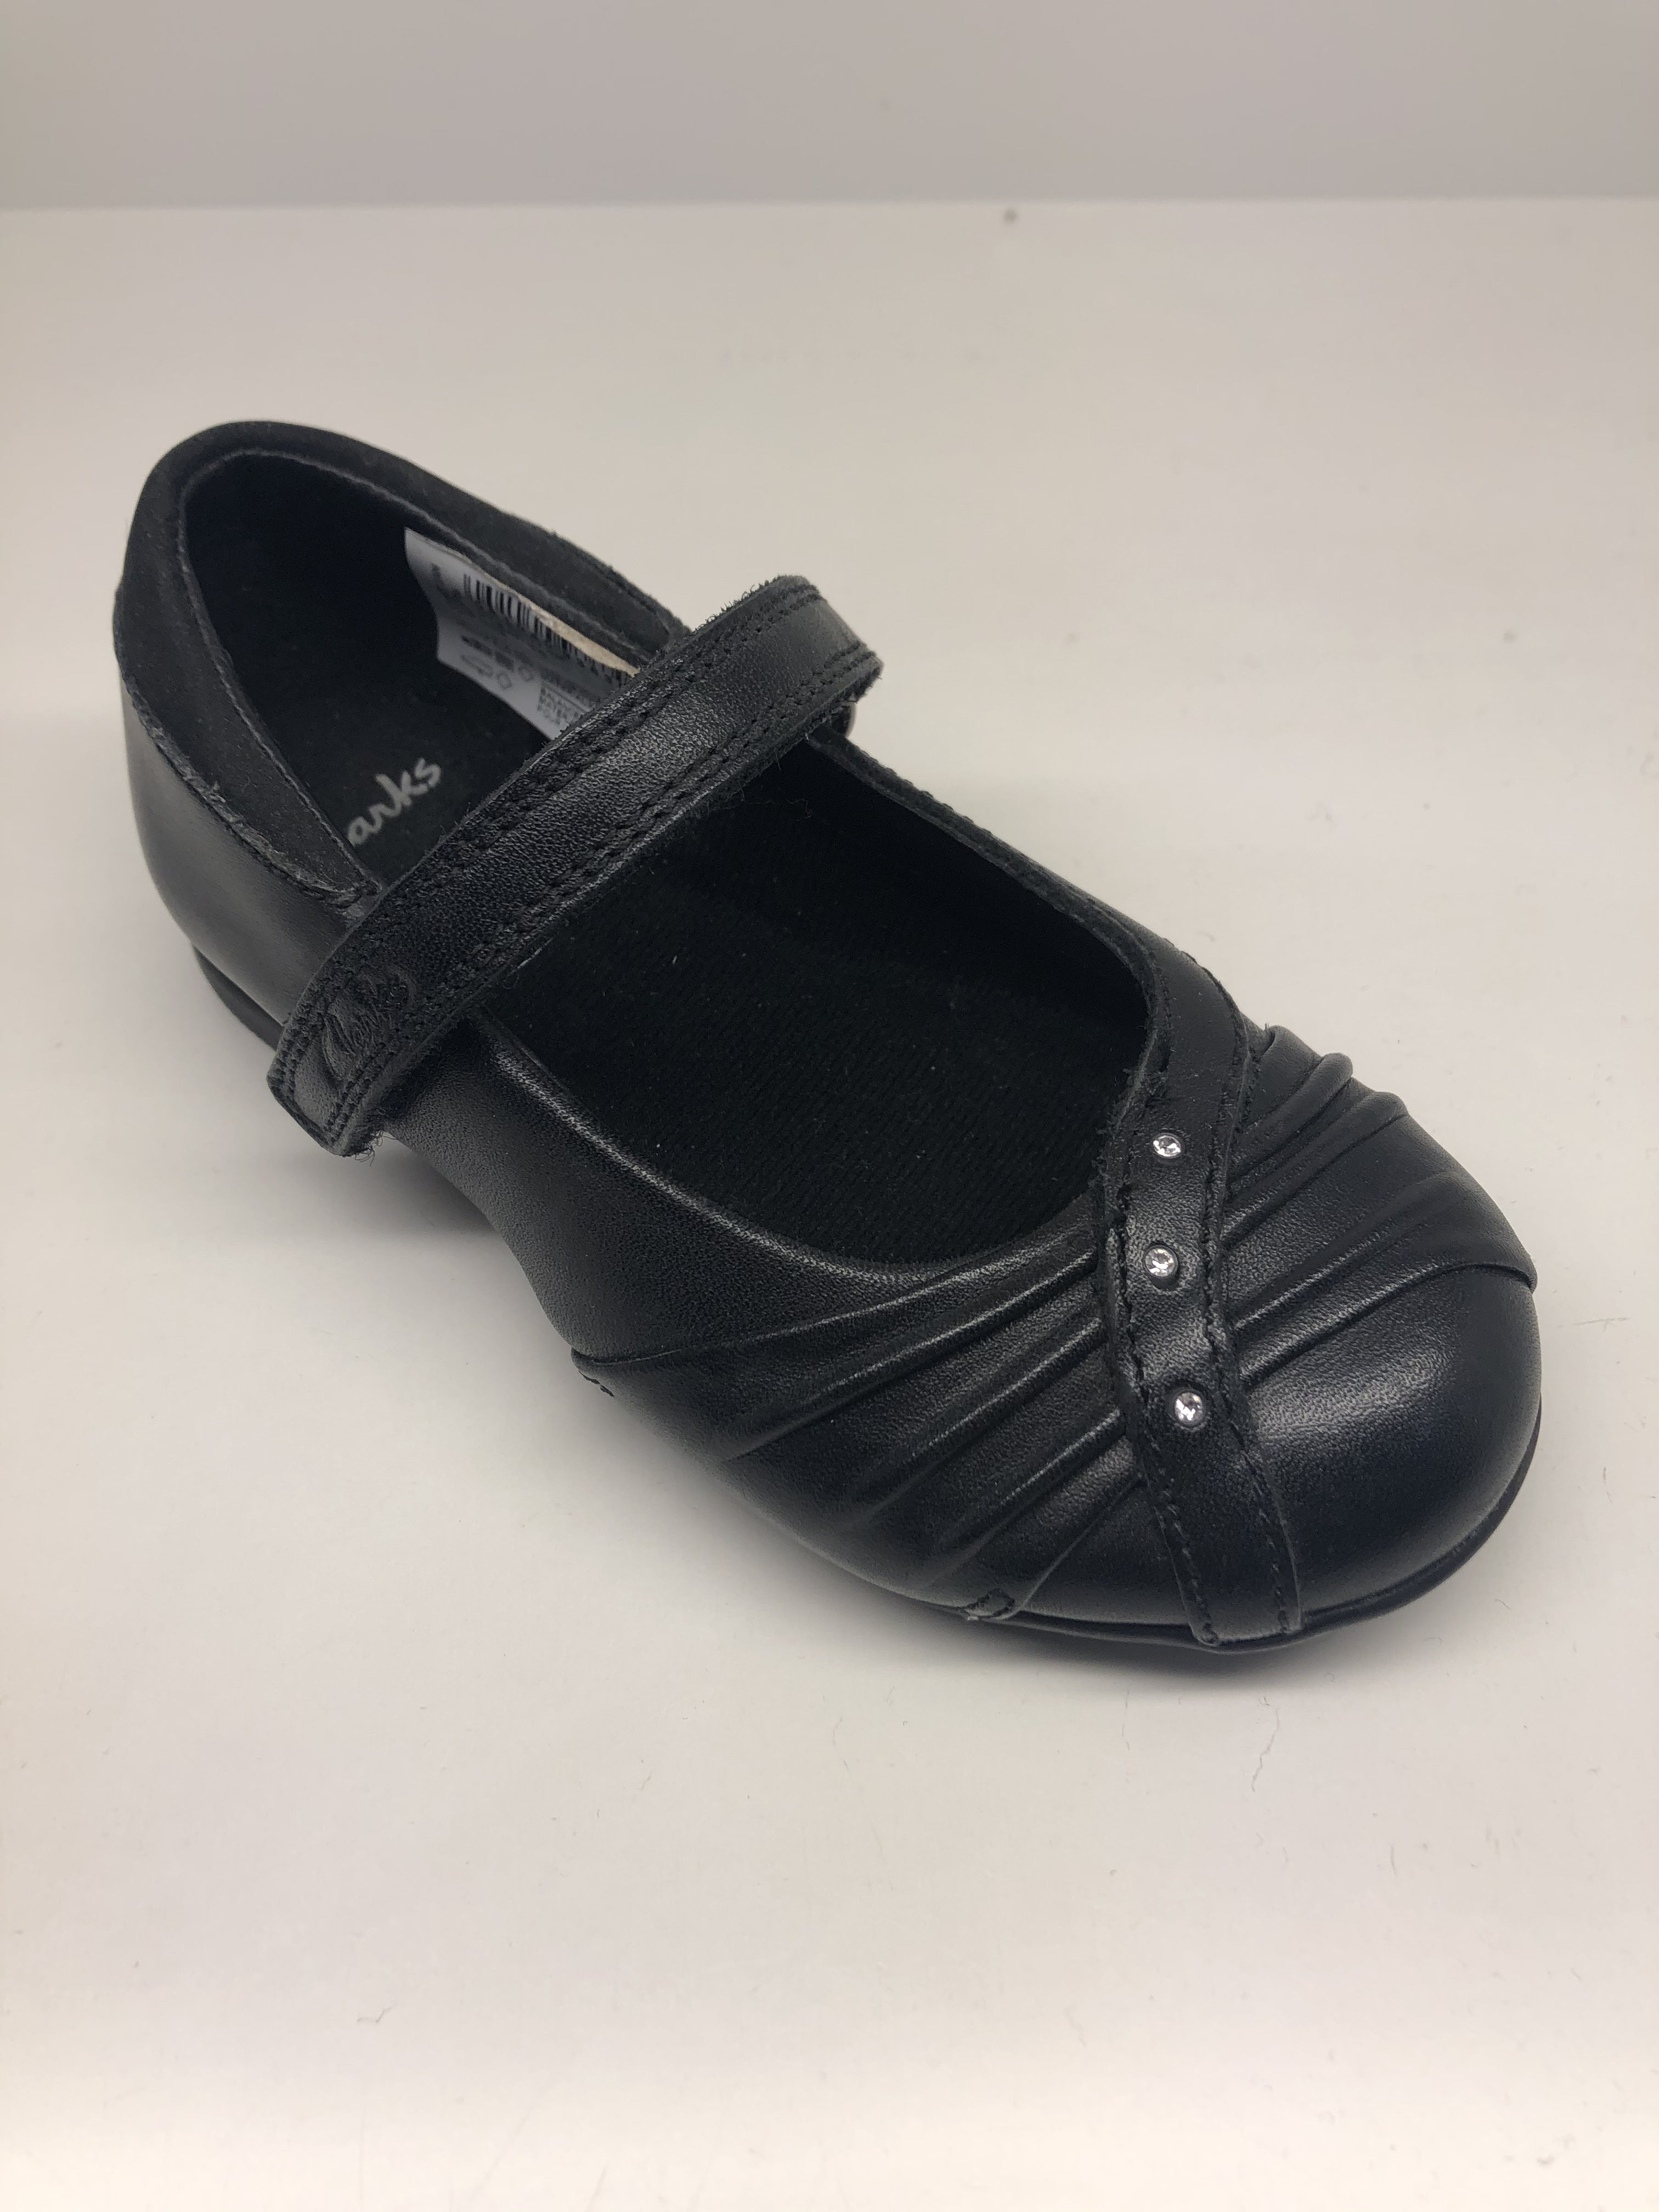 Clarks Dolly Shy Girls Black Leather Shoes